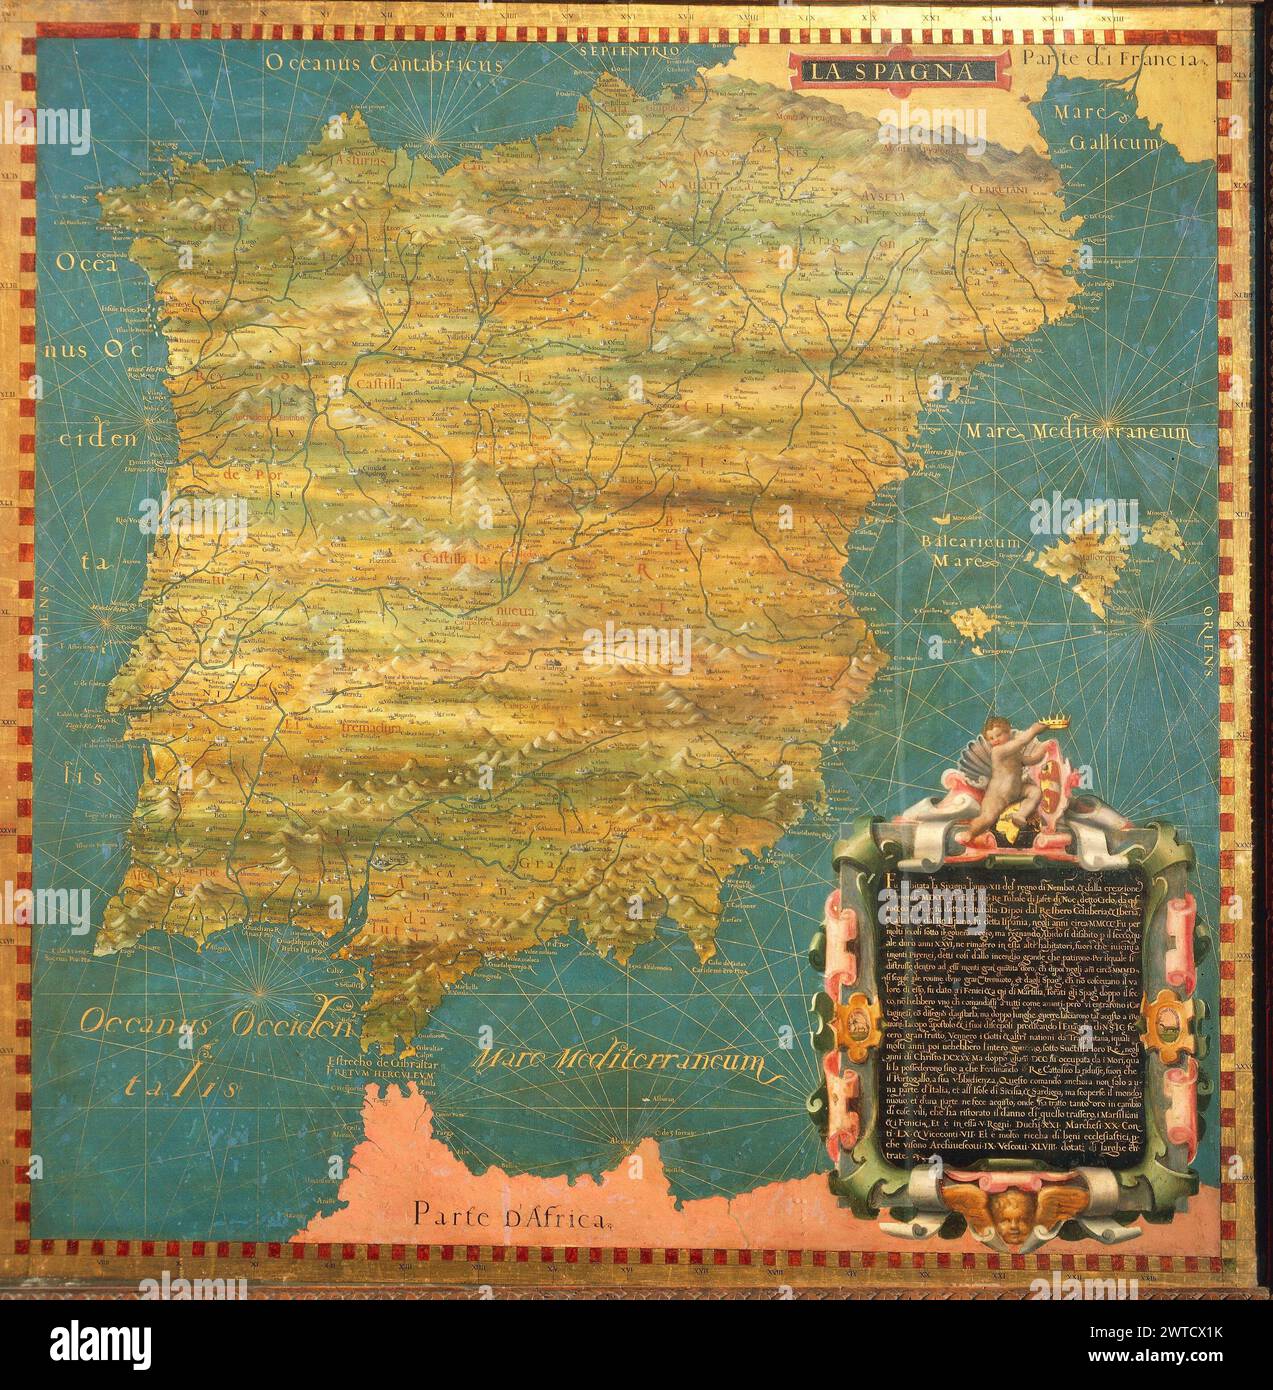 Map of the Iberian peninsula - Hall of Geographical Maps , Florence Palazzo Vecchio, 1500 Antique world maps Stock Photo